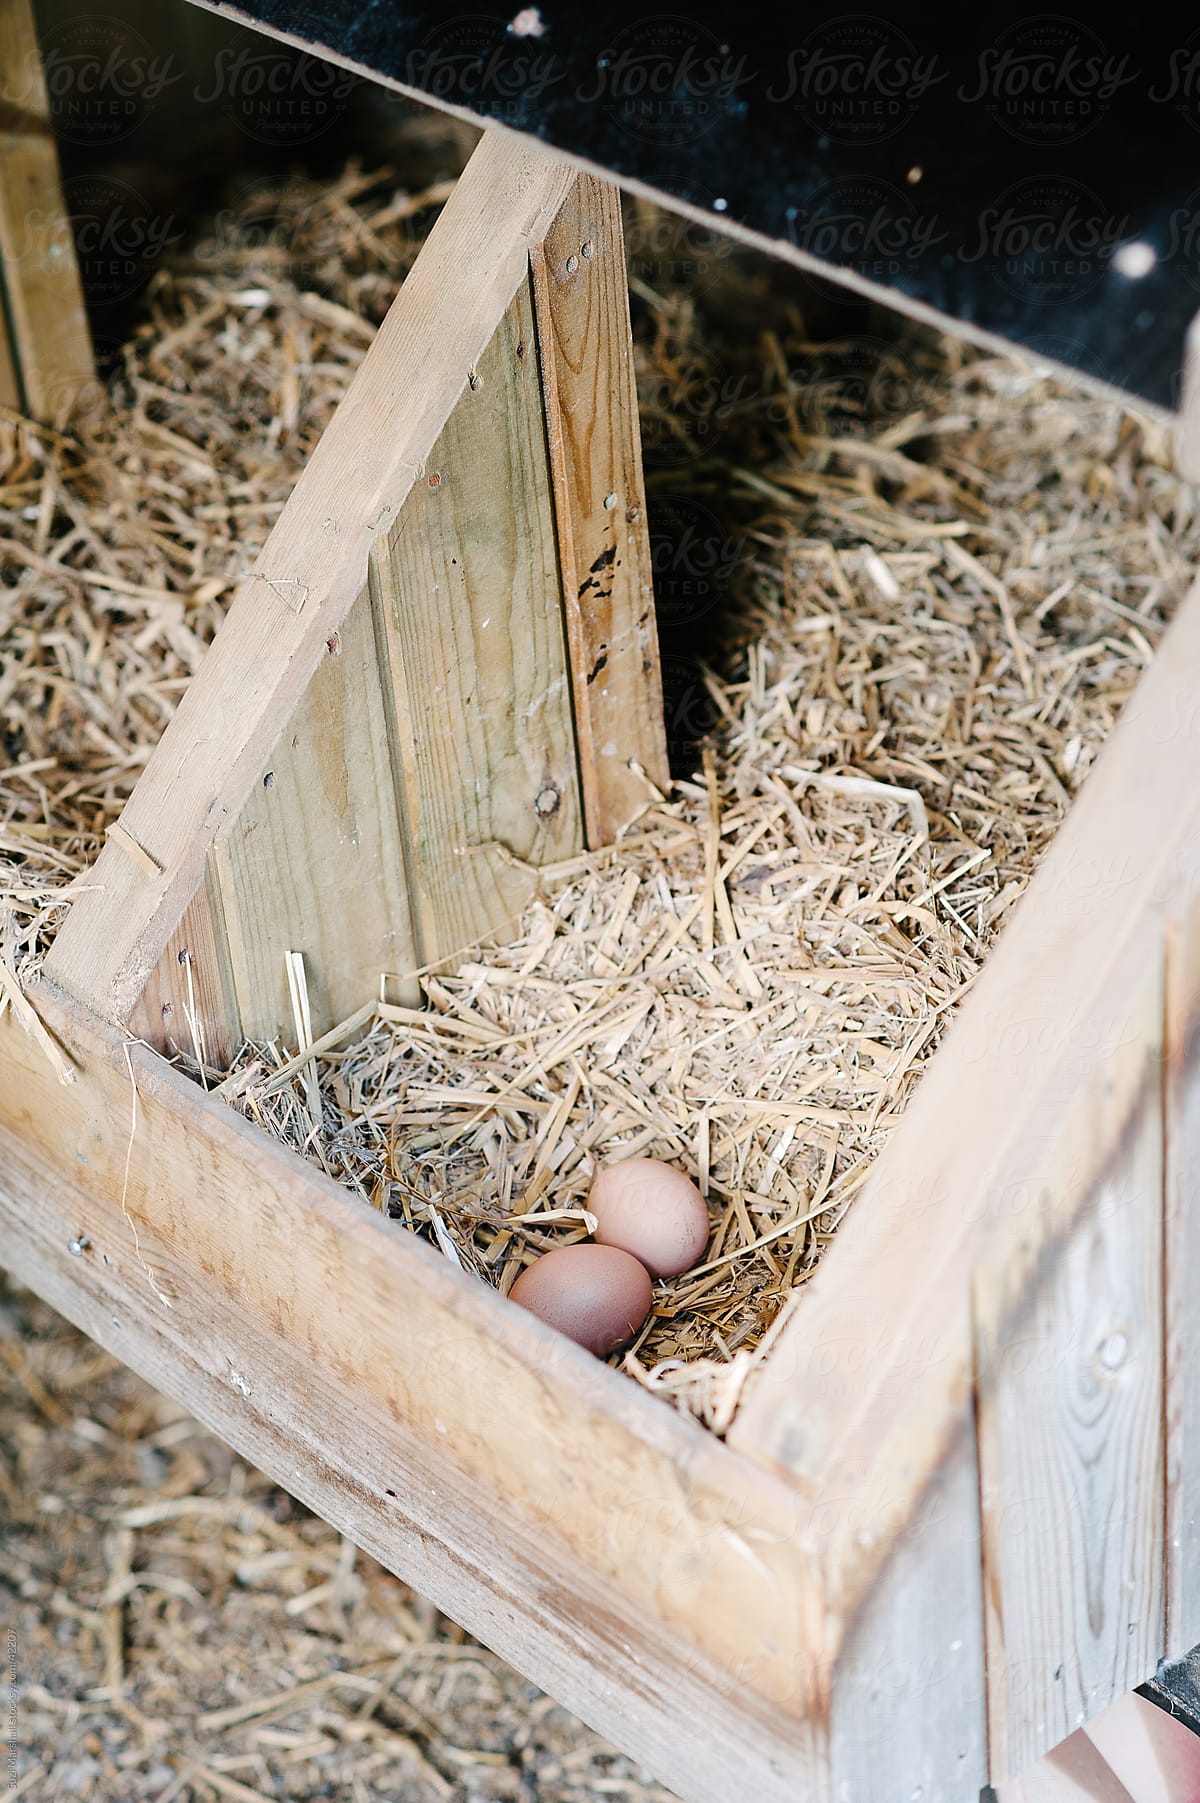 Freshly laid eggs on straw in a chicken coop